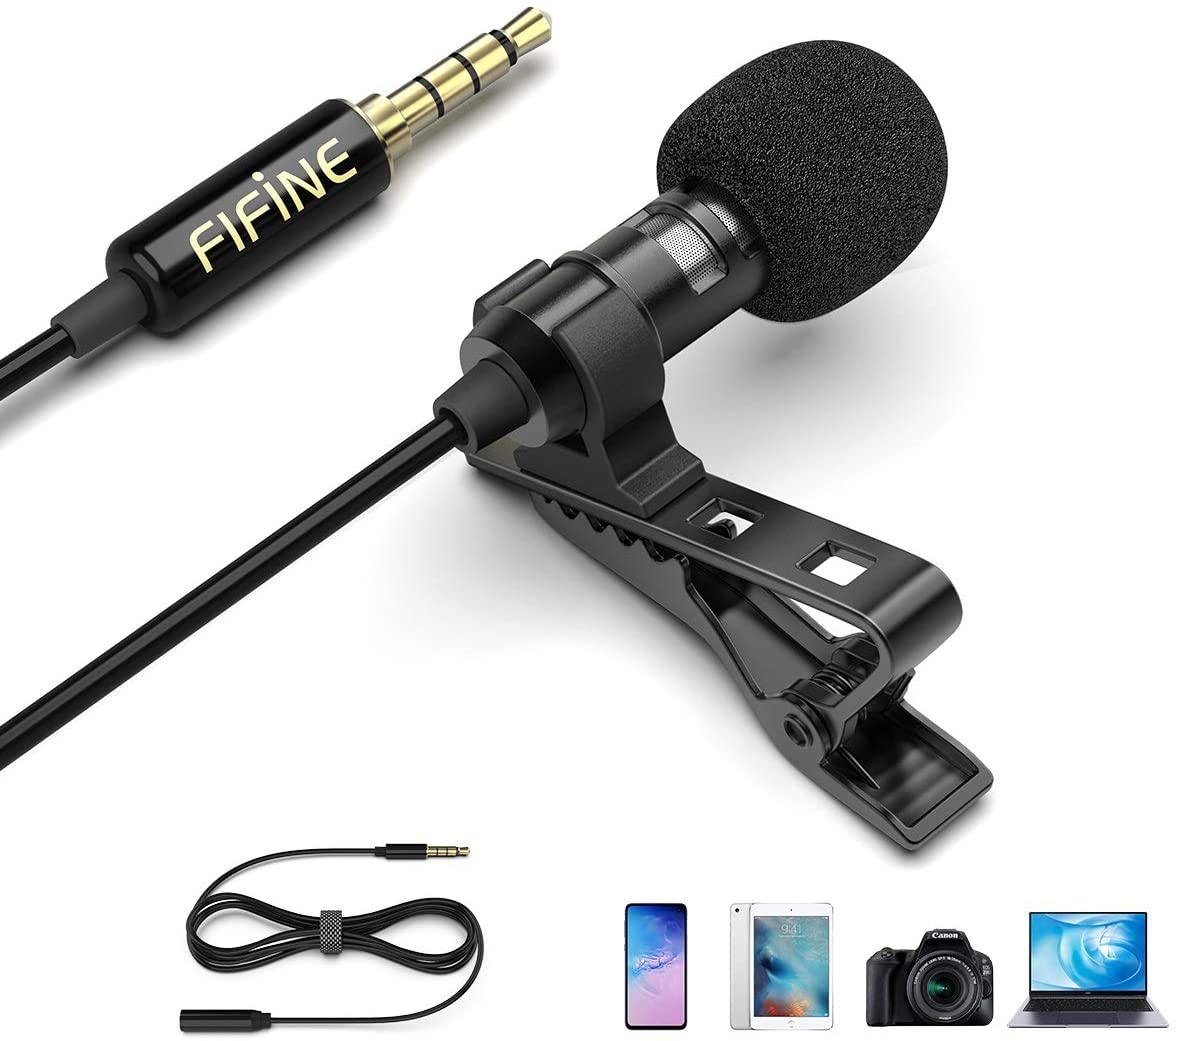 Microphone,　Vid　Lavalier　JG　Mic　Clip　–　Lapel　On　YouTube　Superstore　3.5mm　C1　Fifine　for